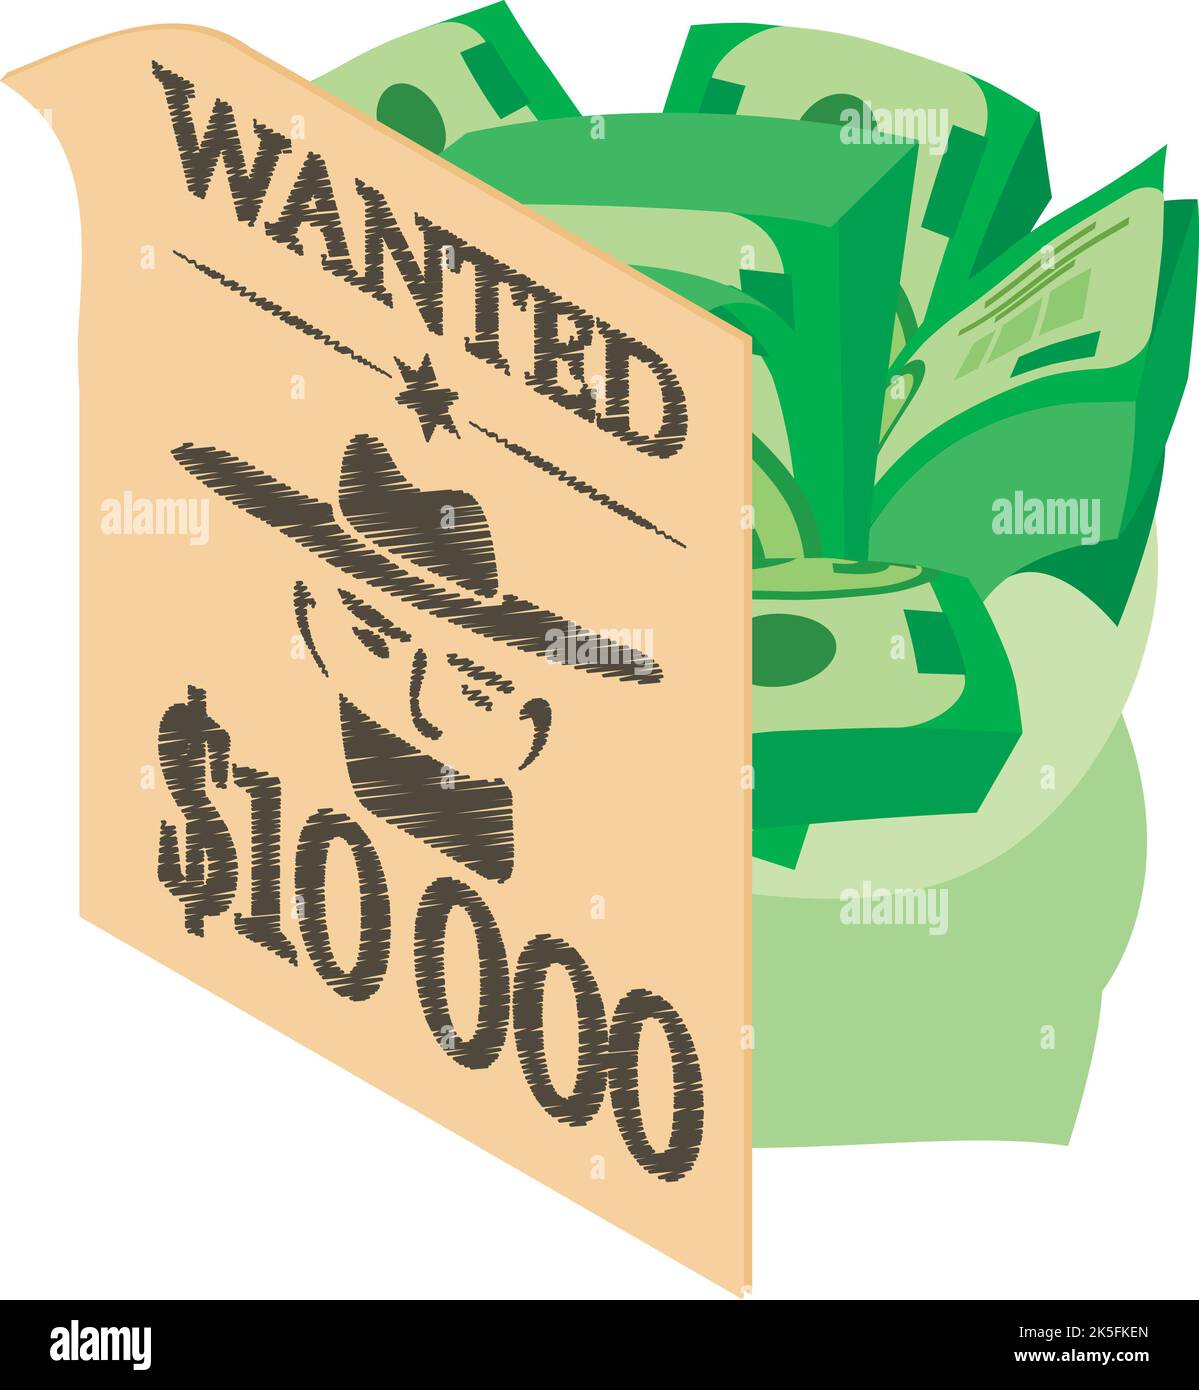 Wild west icon isometric vector. Wanted poster and big bag of dollar bill icon. Texas wild west, western Stock Vector